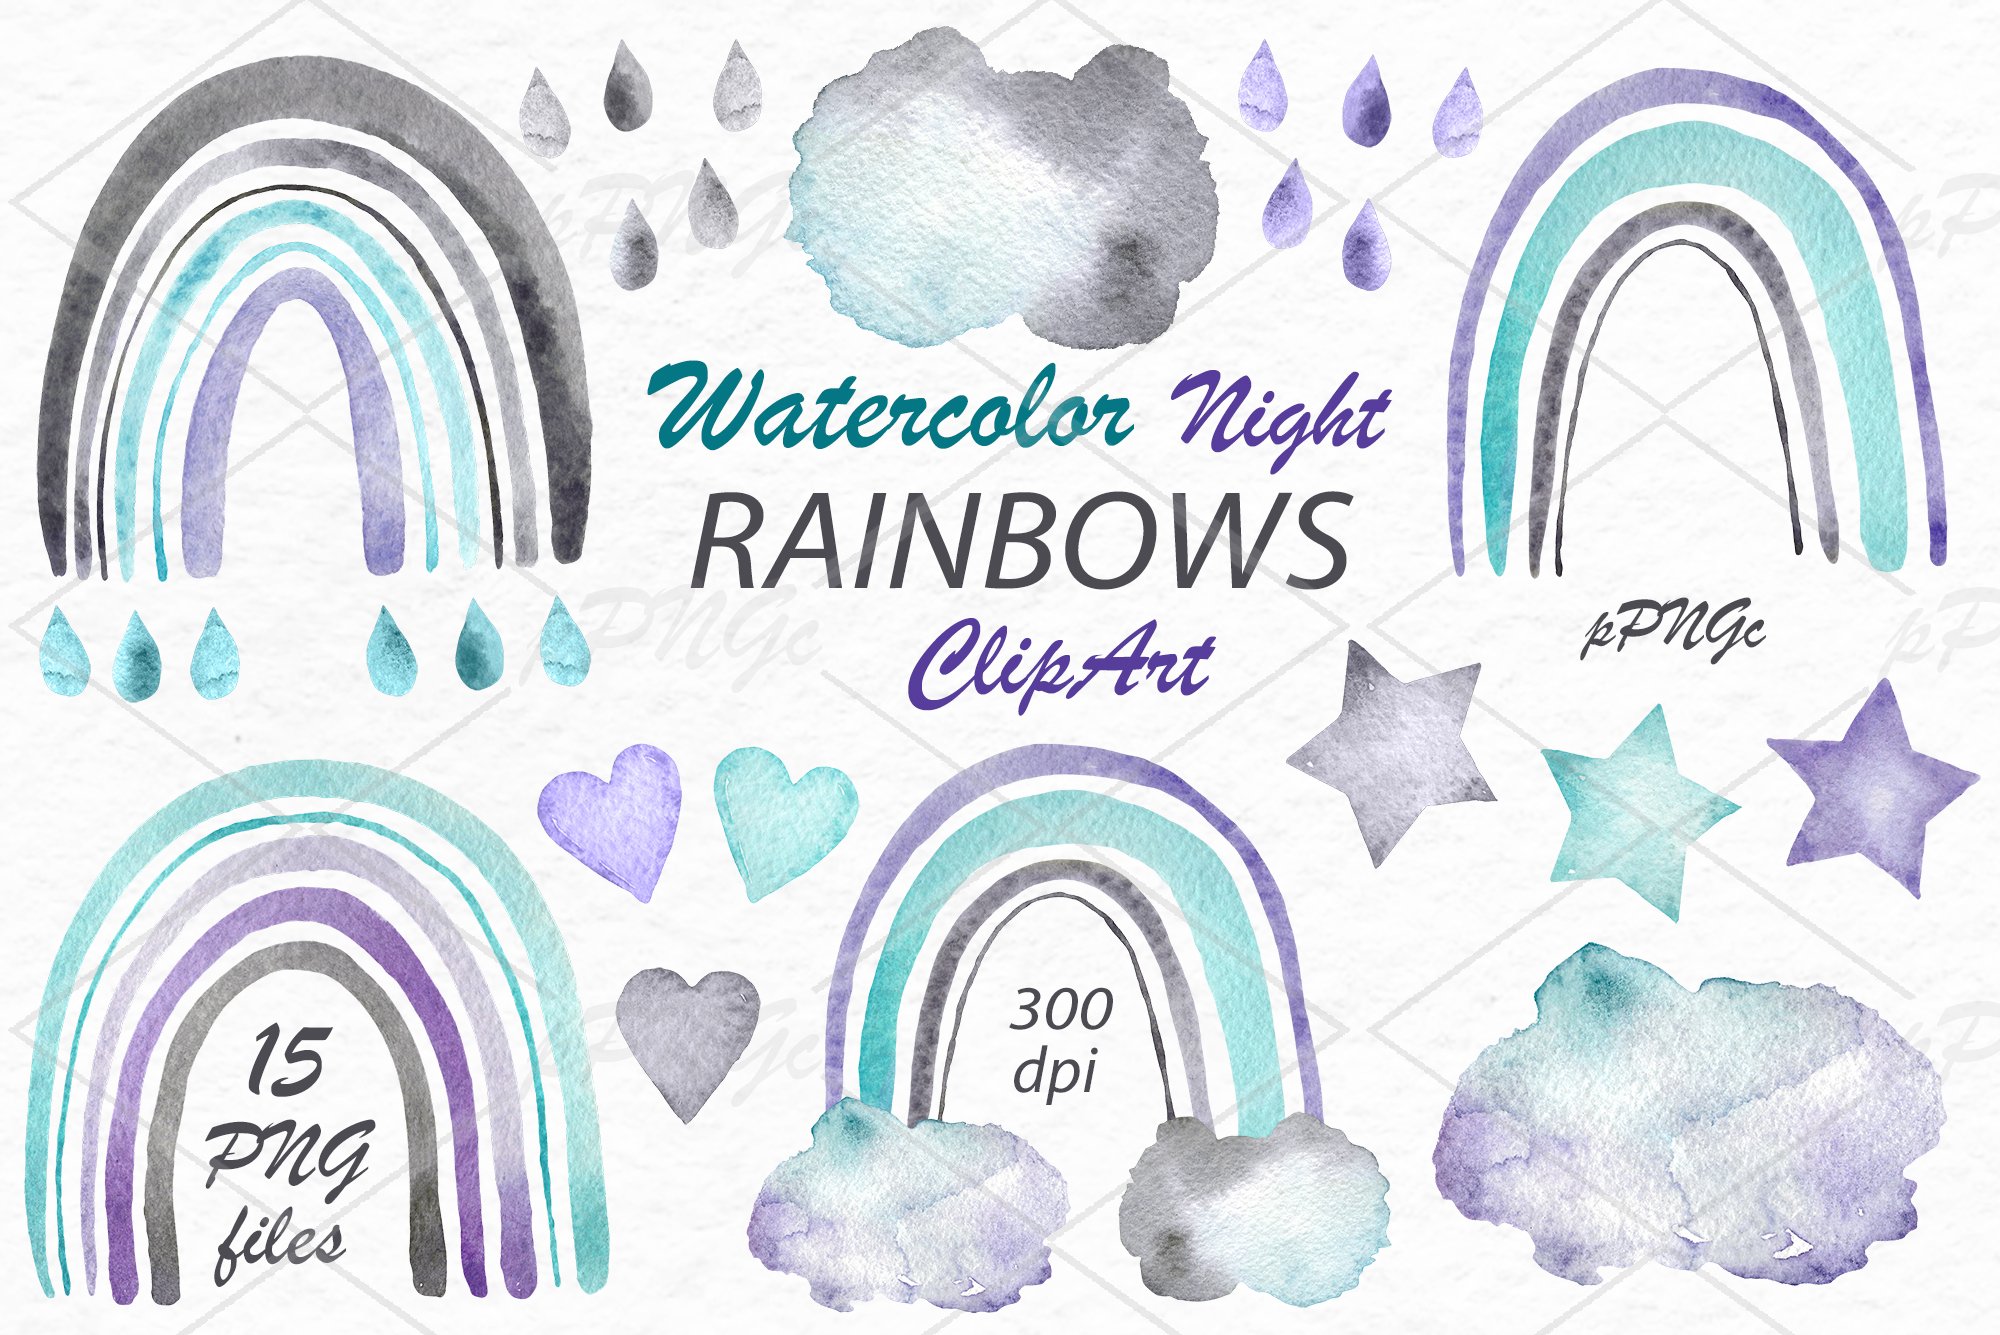 Watercolor Night Rainbows Clipart cover image.